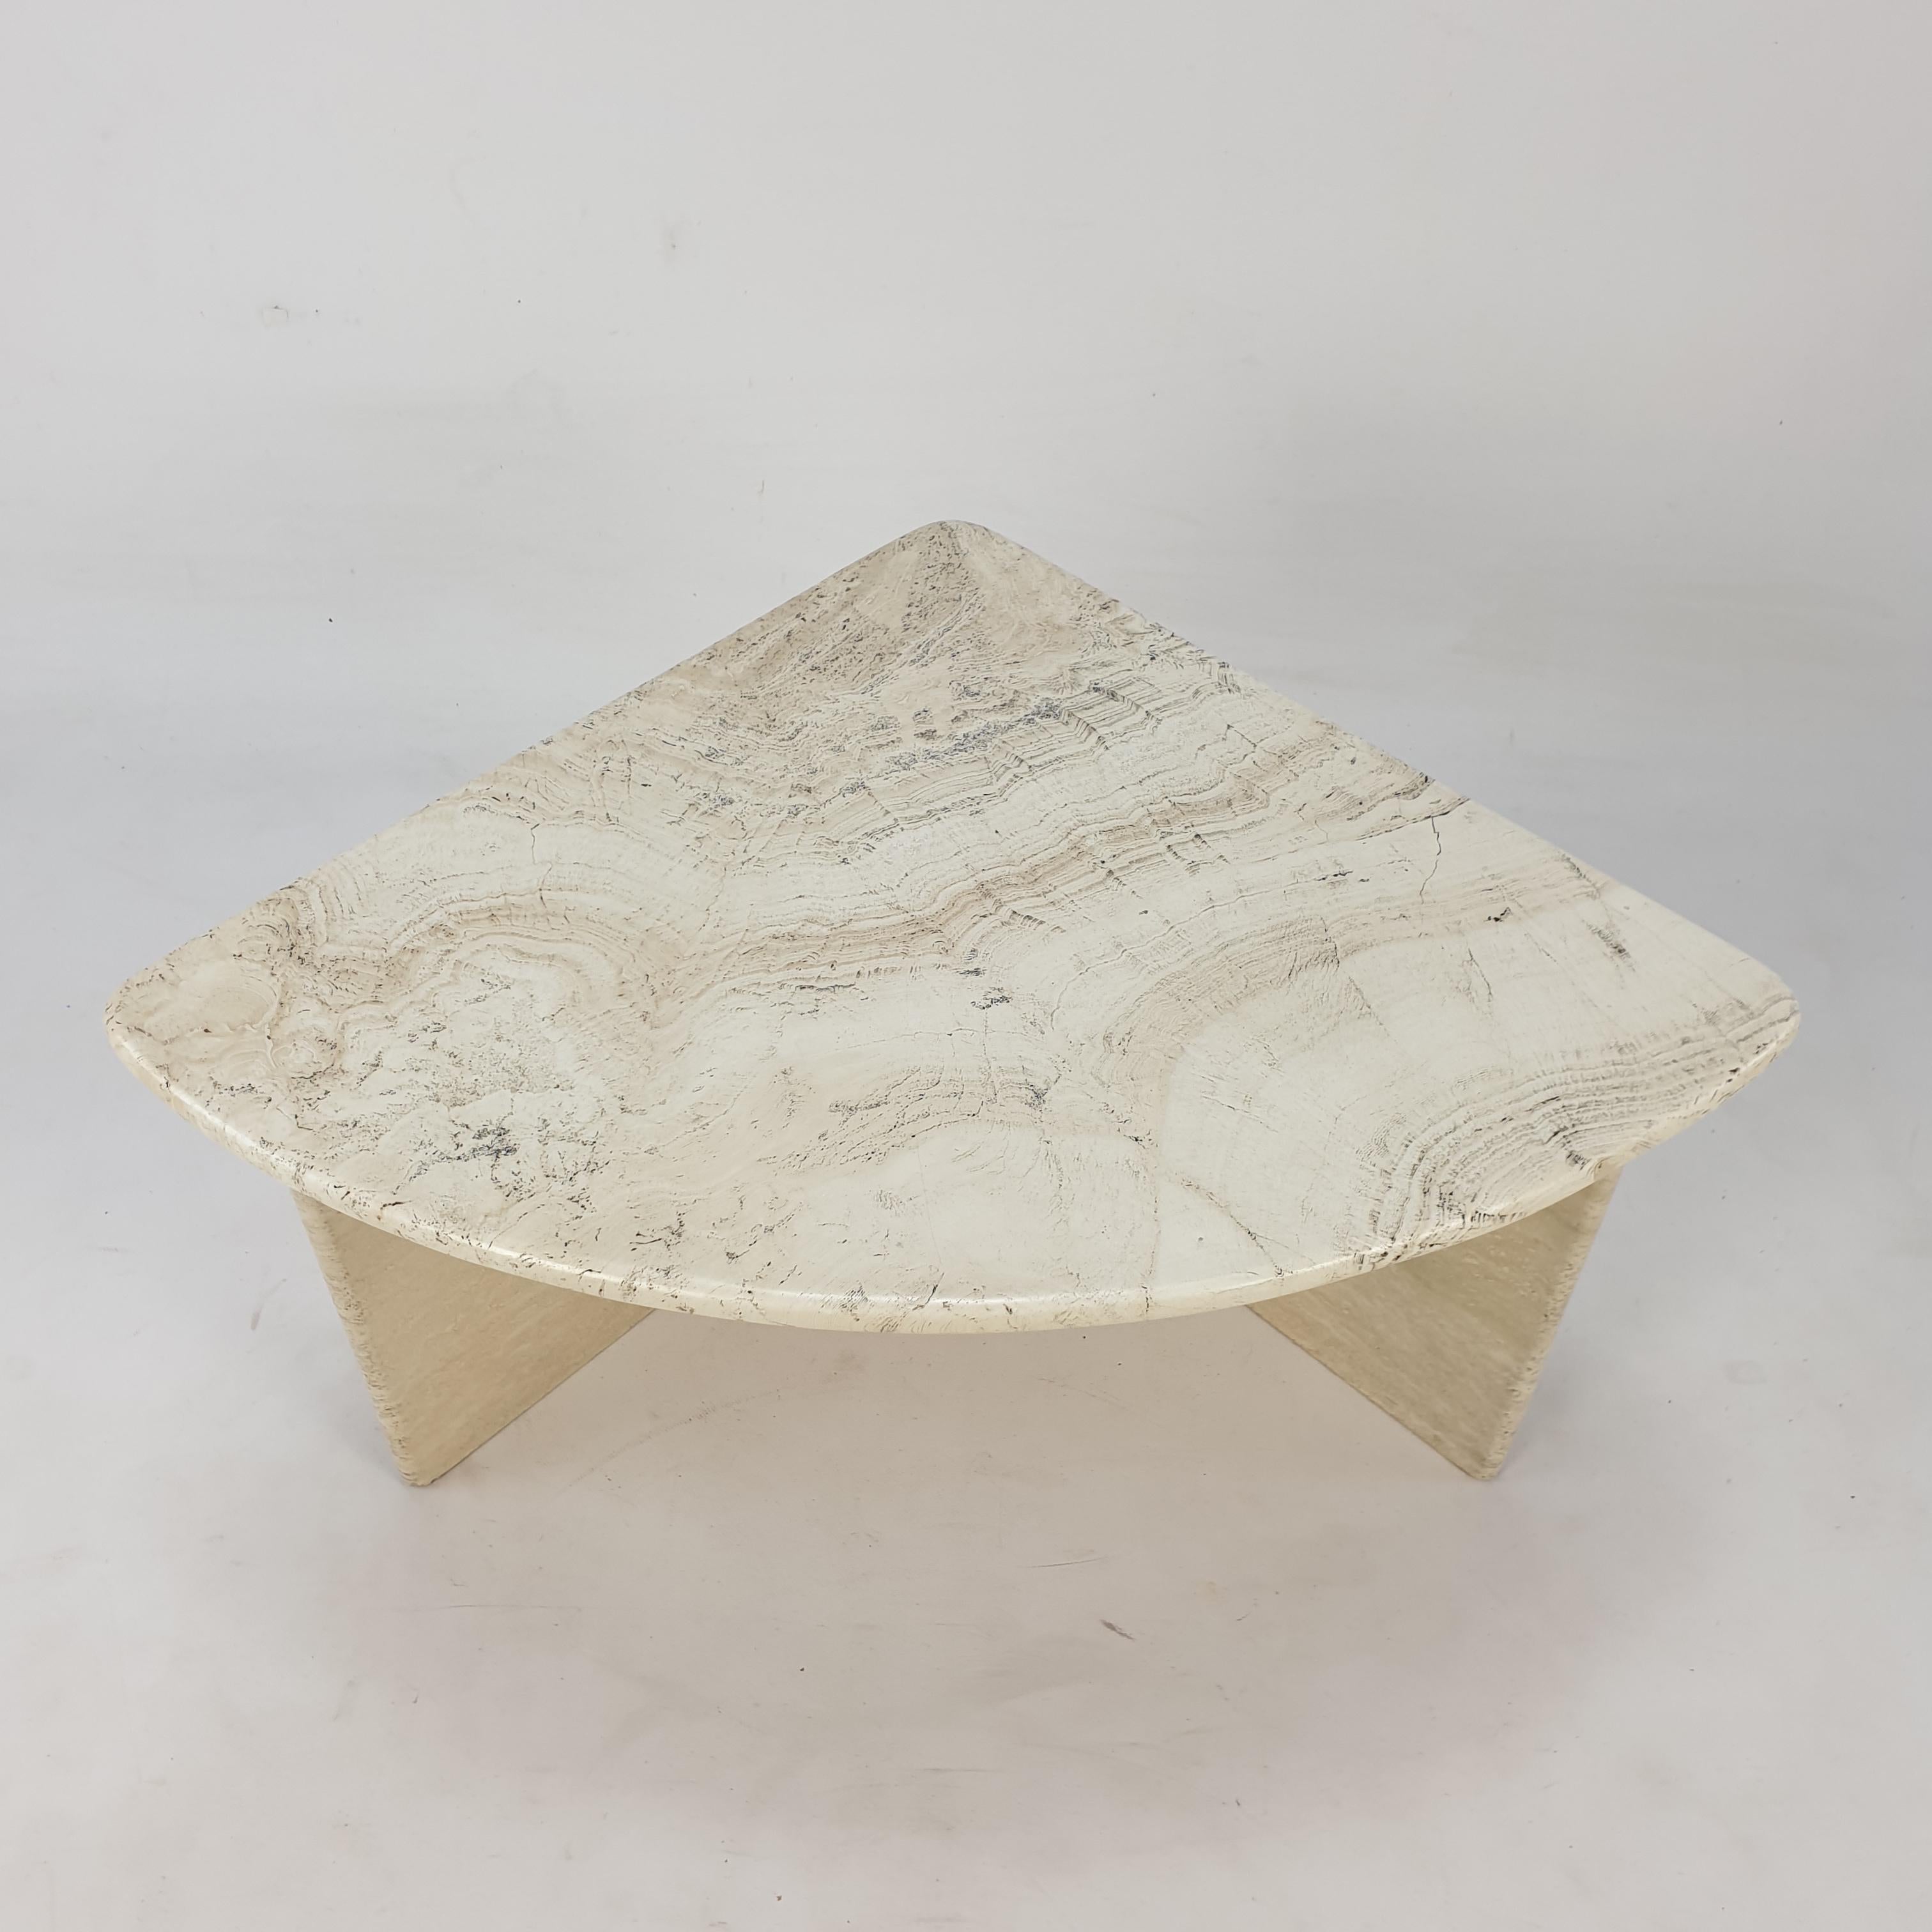 Very nice Italian Coffee Table from the 80's, handcrafted out of travertine. It is possible to make a round table with 4 of these sections. The top is rounded on the edge. This stunning table will make the perfect addition to any seating or living